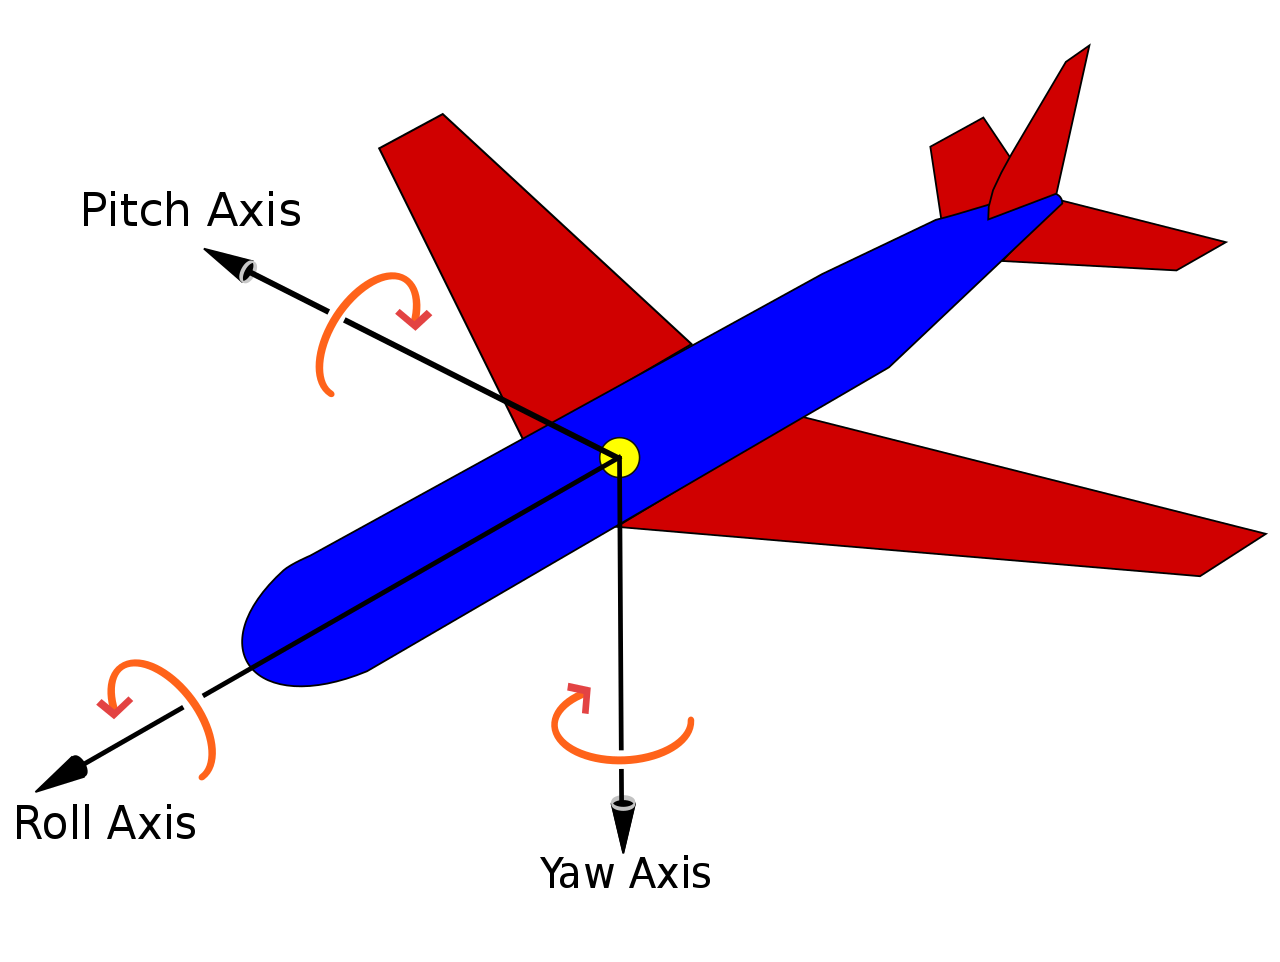 Diagram of an airplane, showing its pitch, roll, and yaw axes.